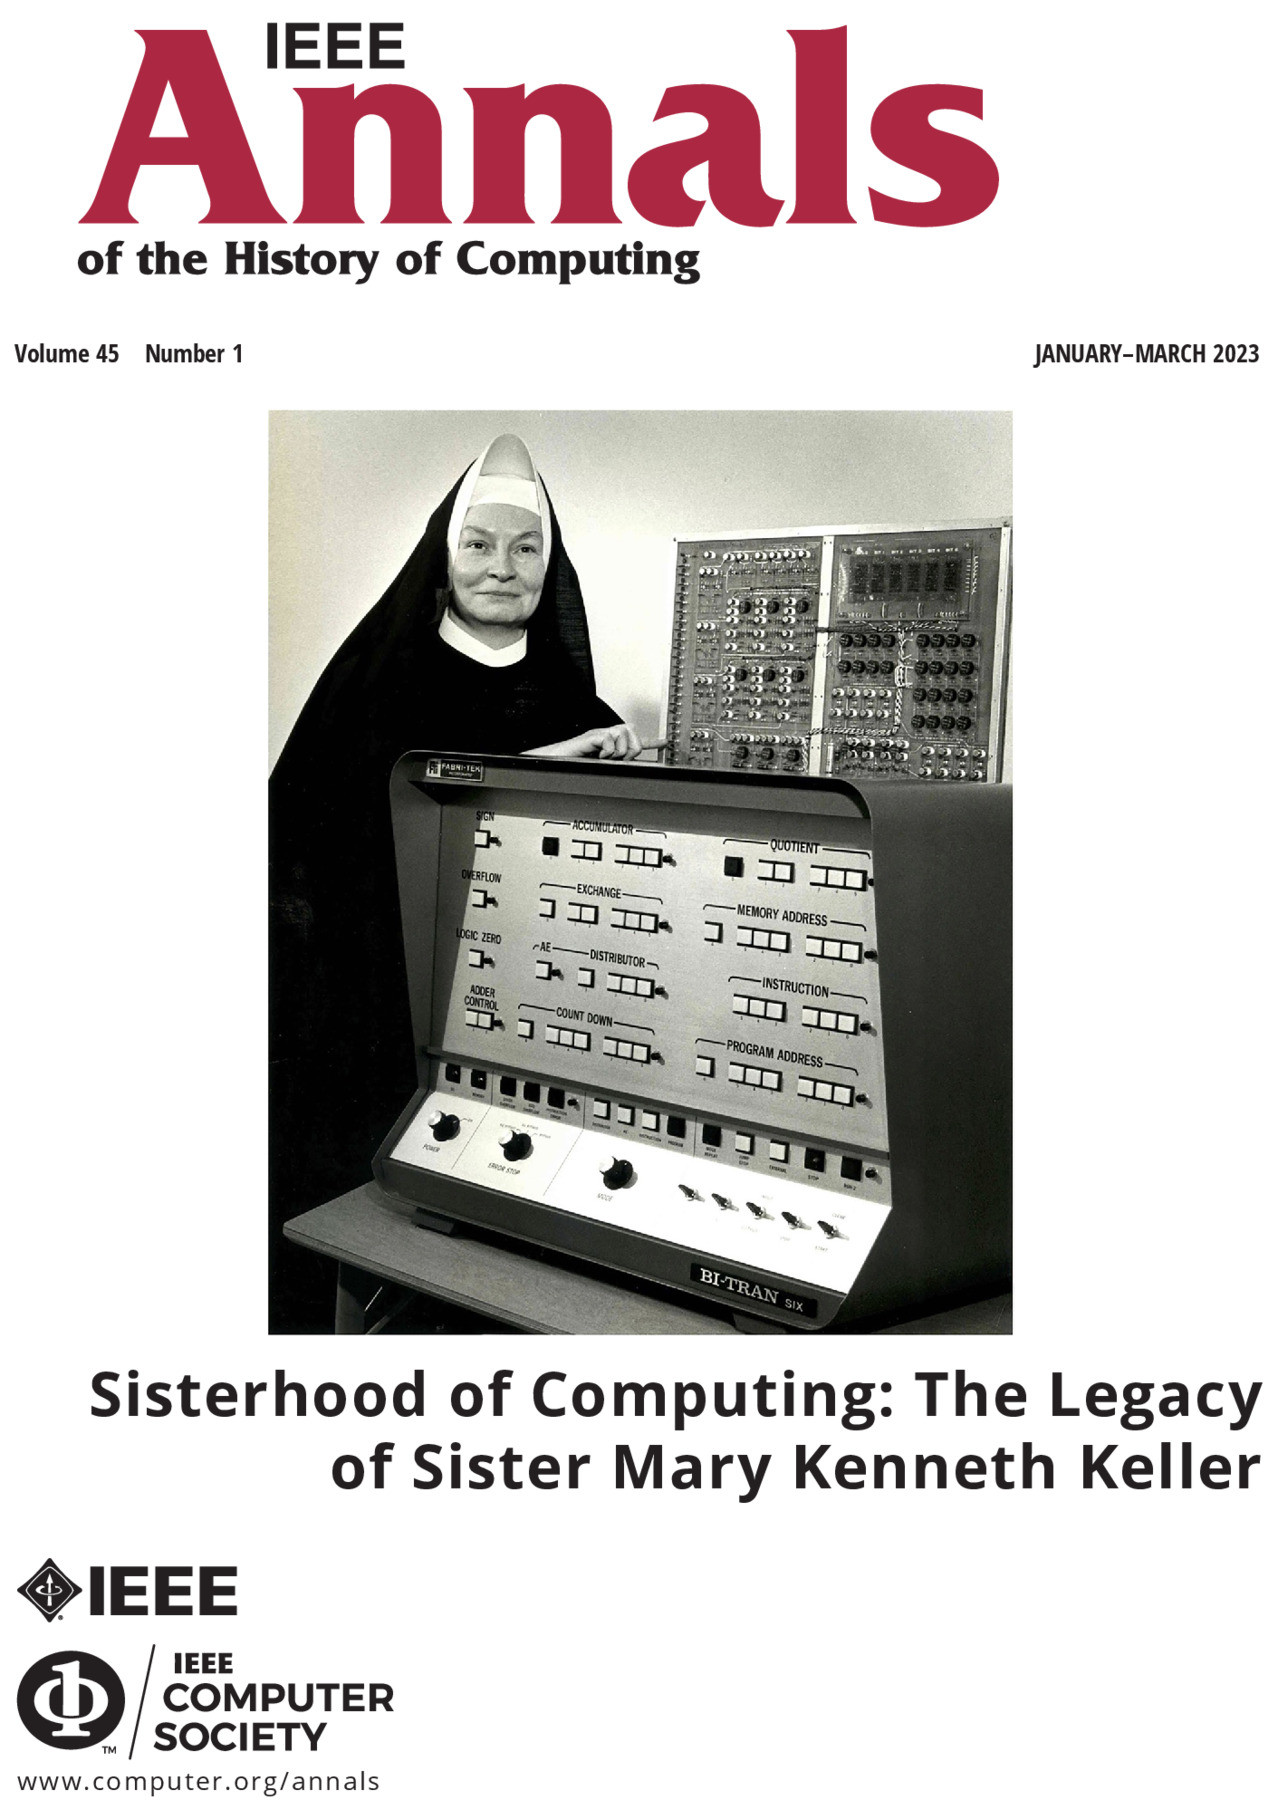 IEEE Annals of the History of Computing January/February/March 2023 Vol. 45 No. 1